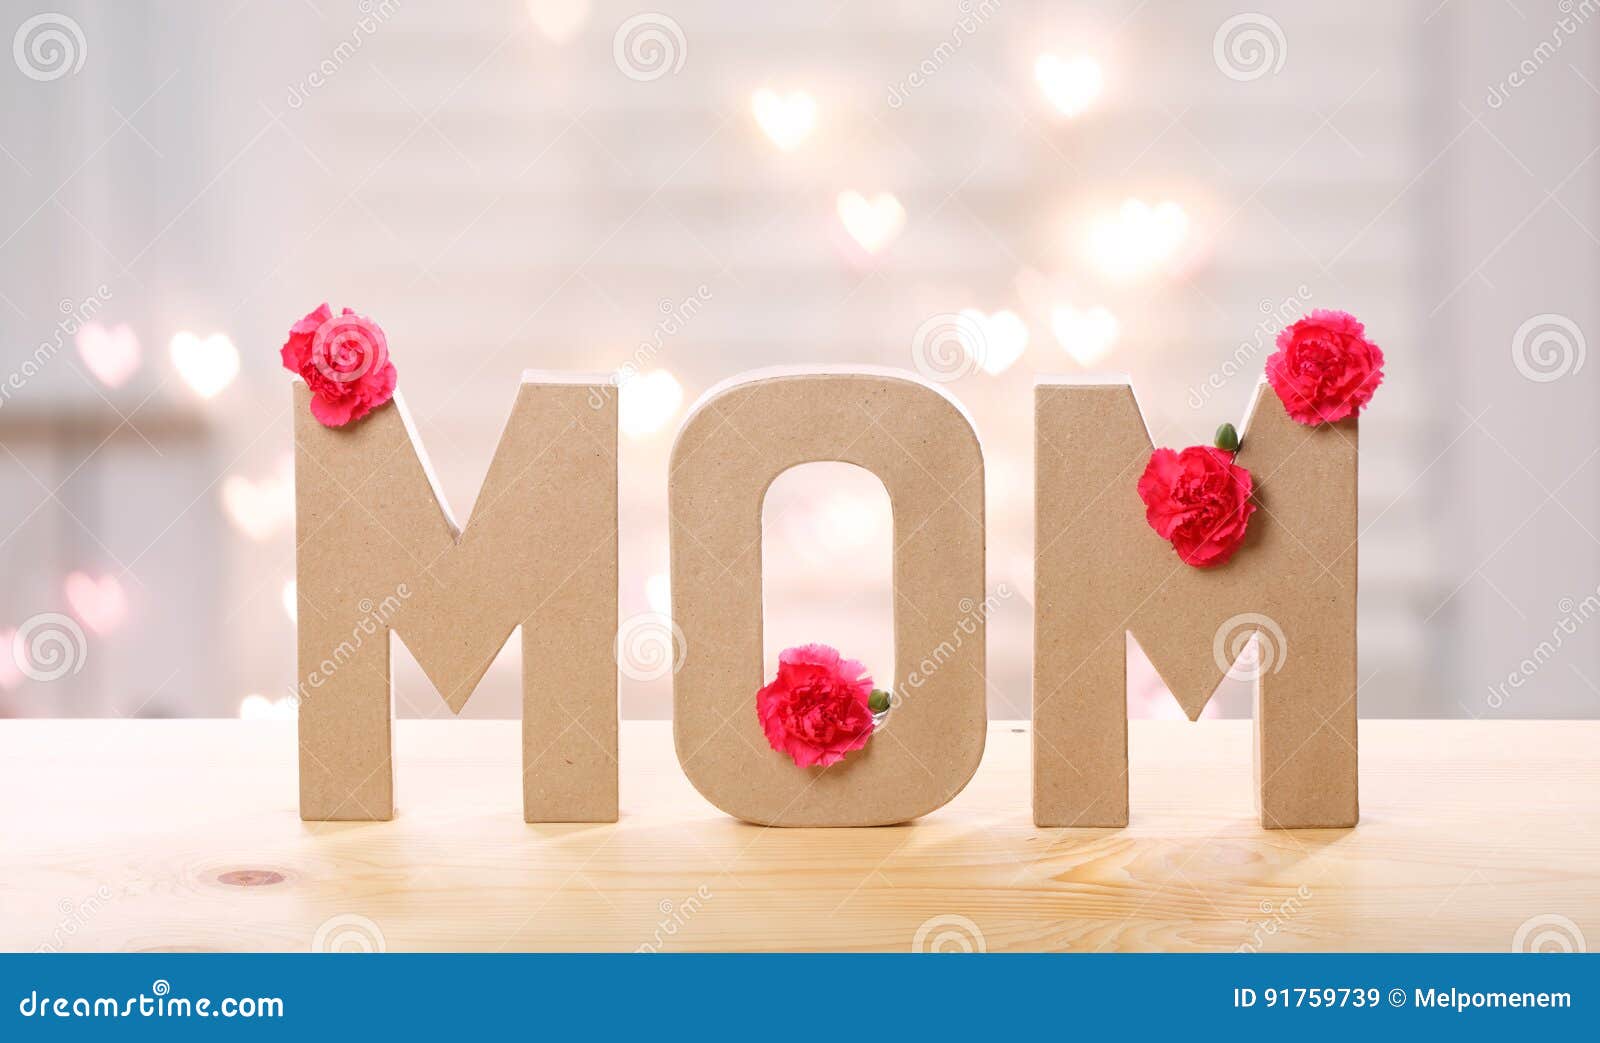 Mom Letter Blocks with Pink Carnation Flowers Stock Image - Image of ...